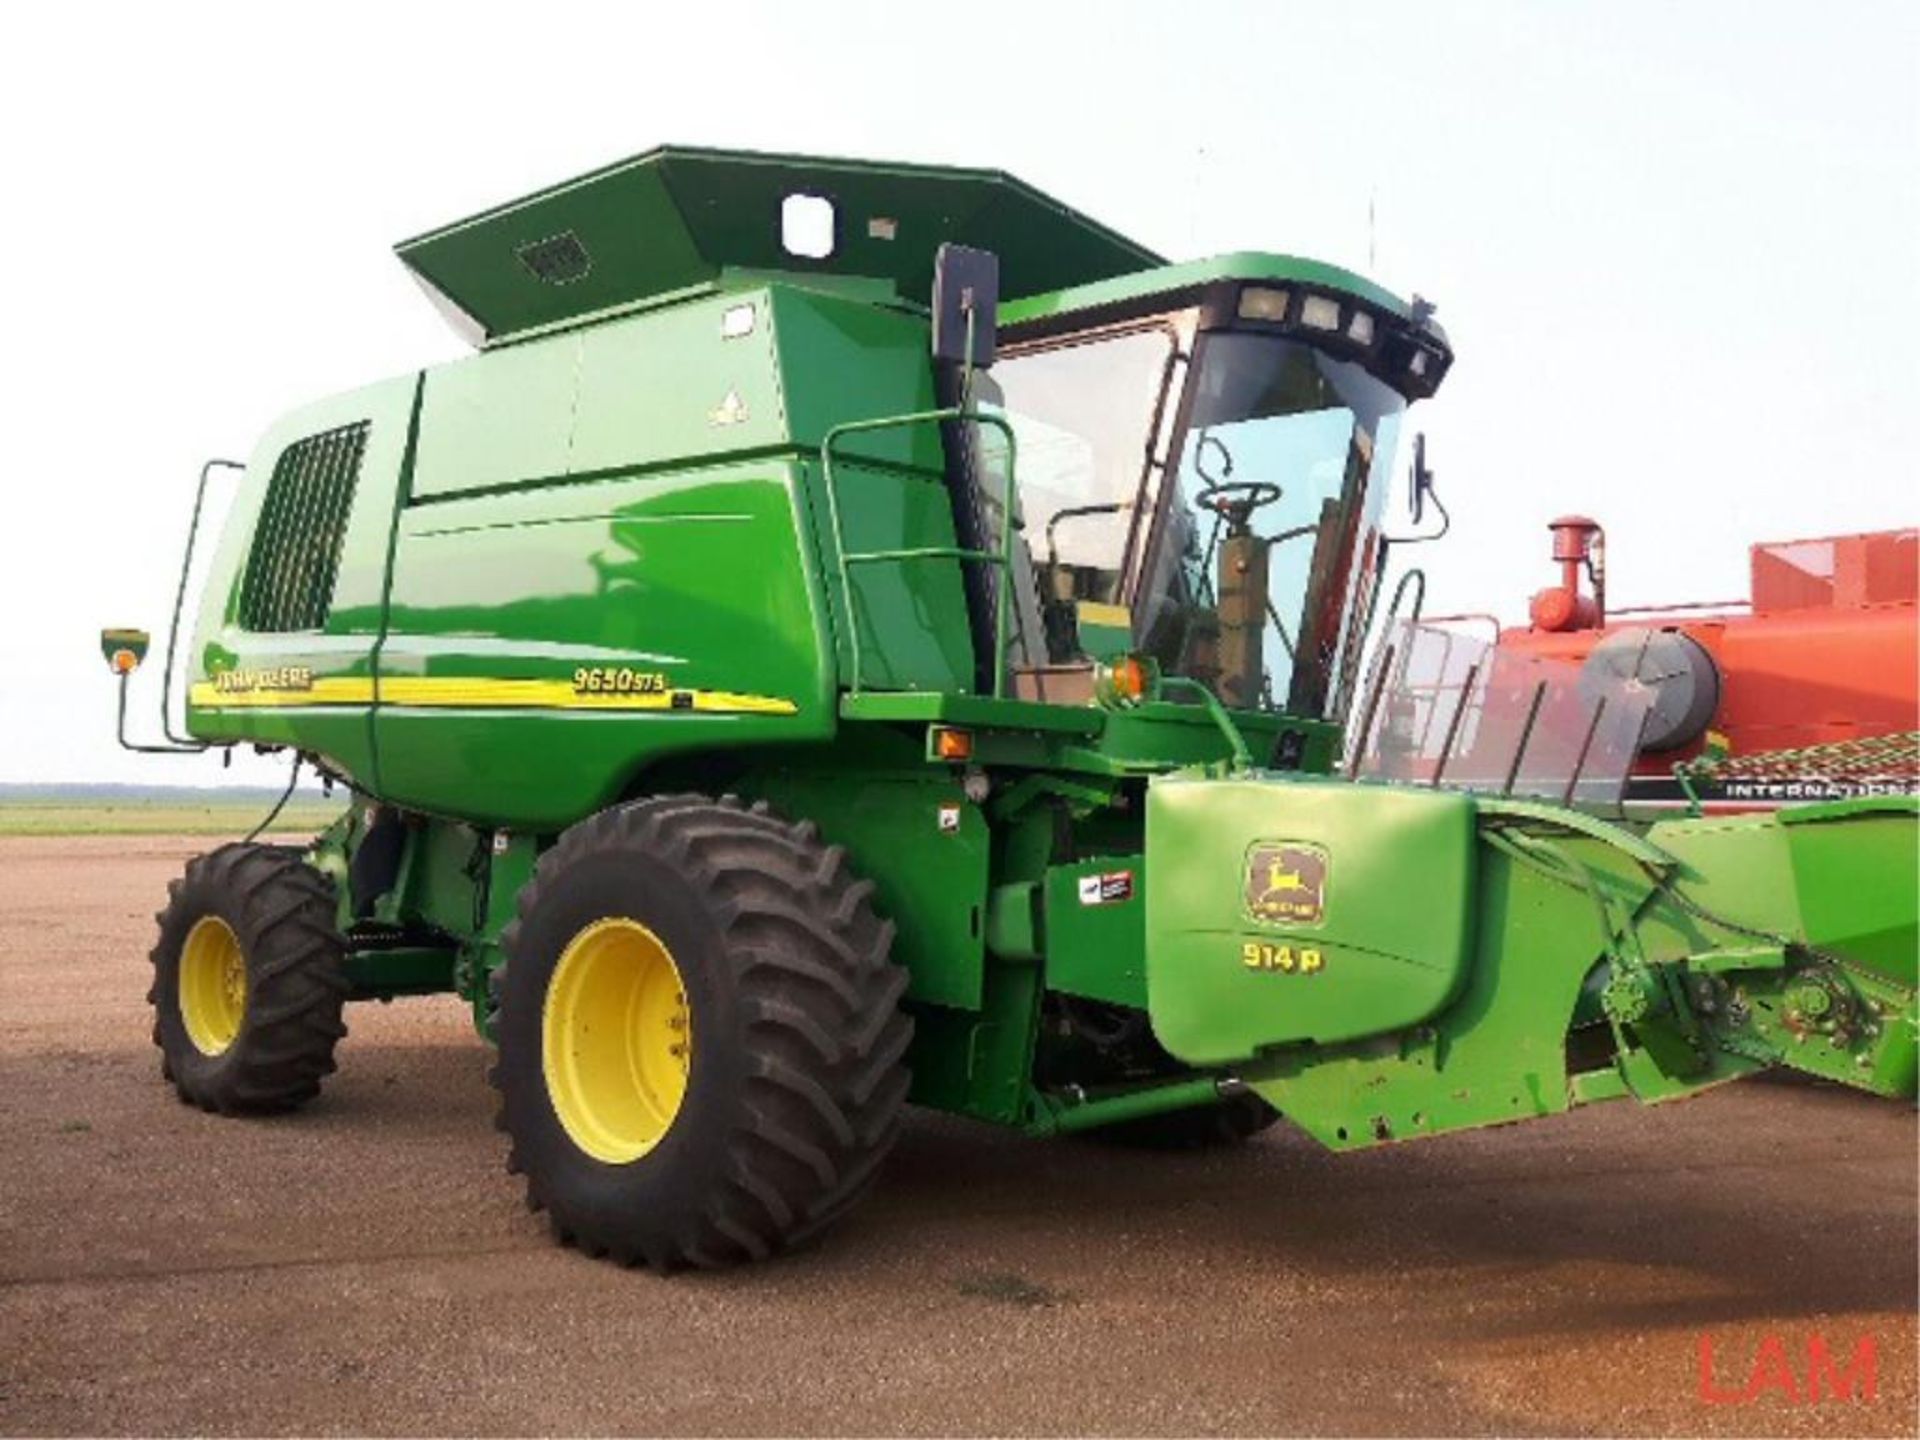 2001 STS 9650 JD Combine sn H09650S692245 3763 eng hrs, 3000 sep hrs, 800/65 R32 fr, 1.4-26 rr, c/ - Image 3 of 30